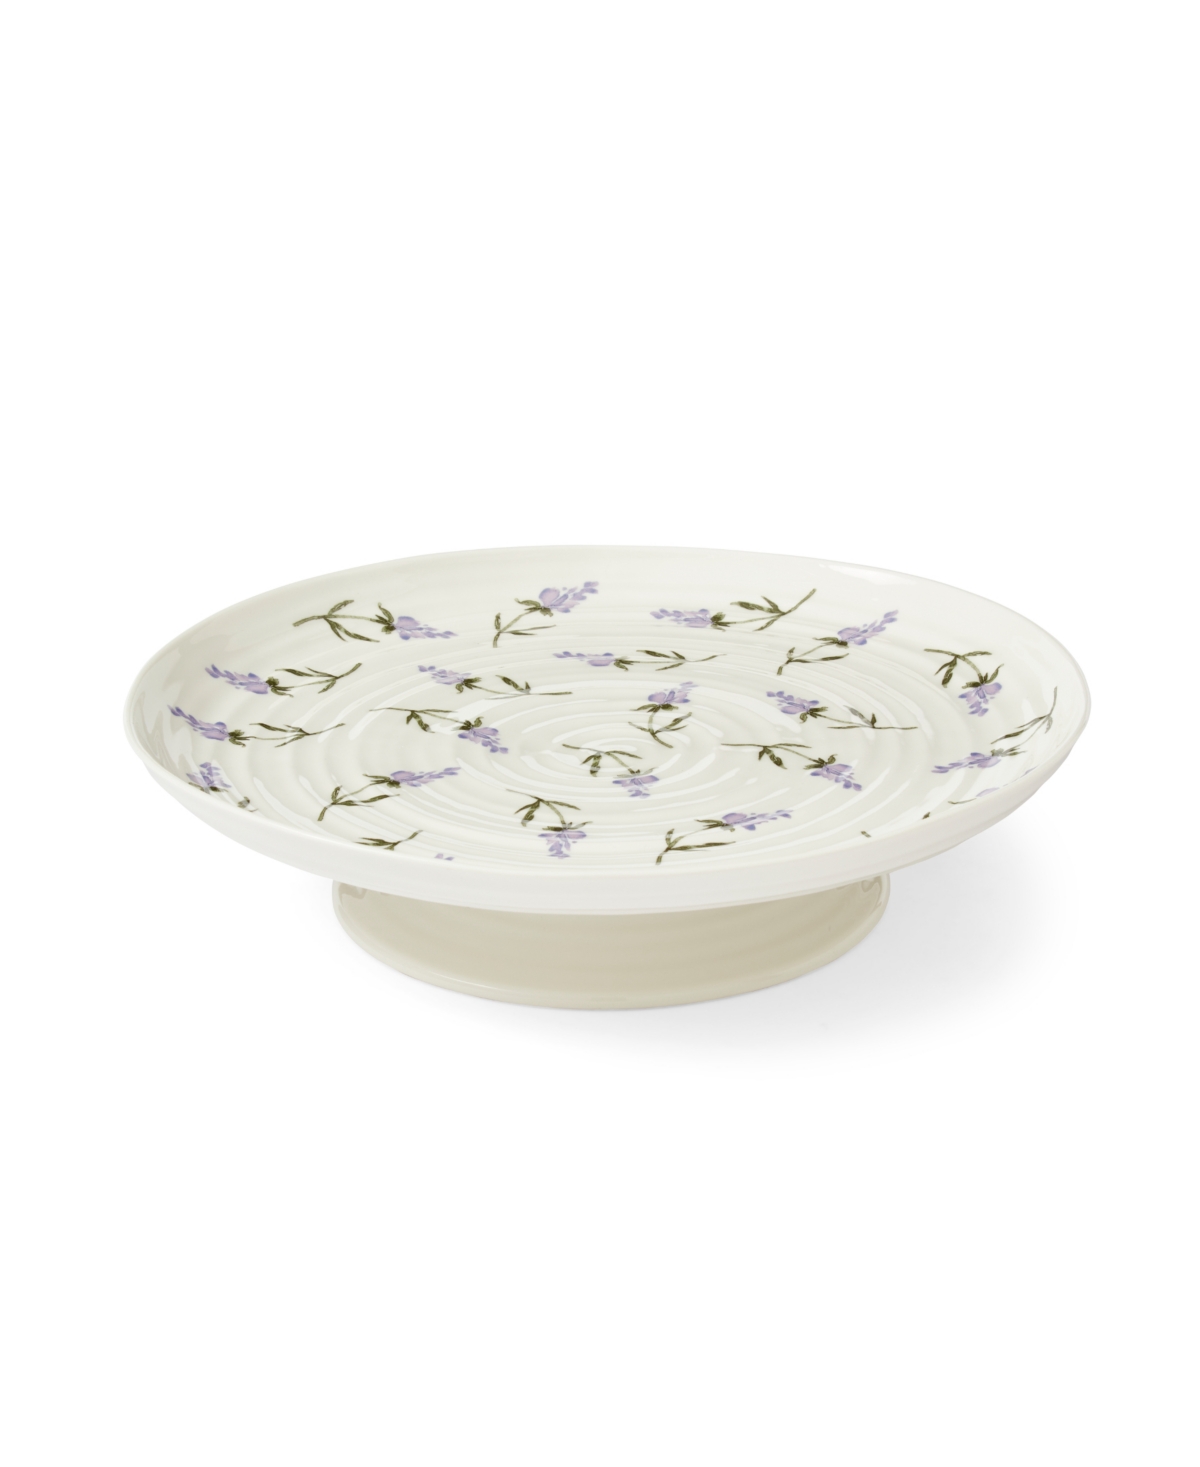 Portmeirion Sophie Conran Lavandula Footed Cake Stand In White